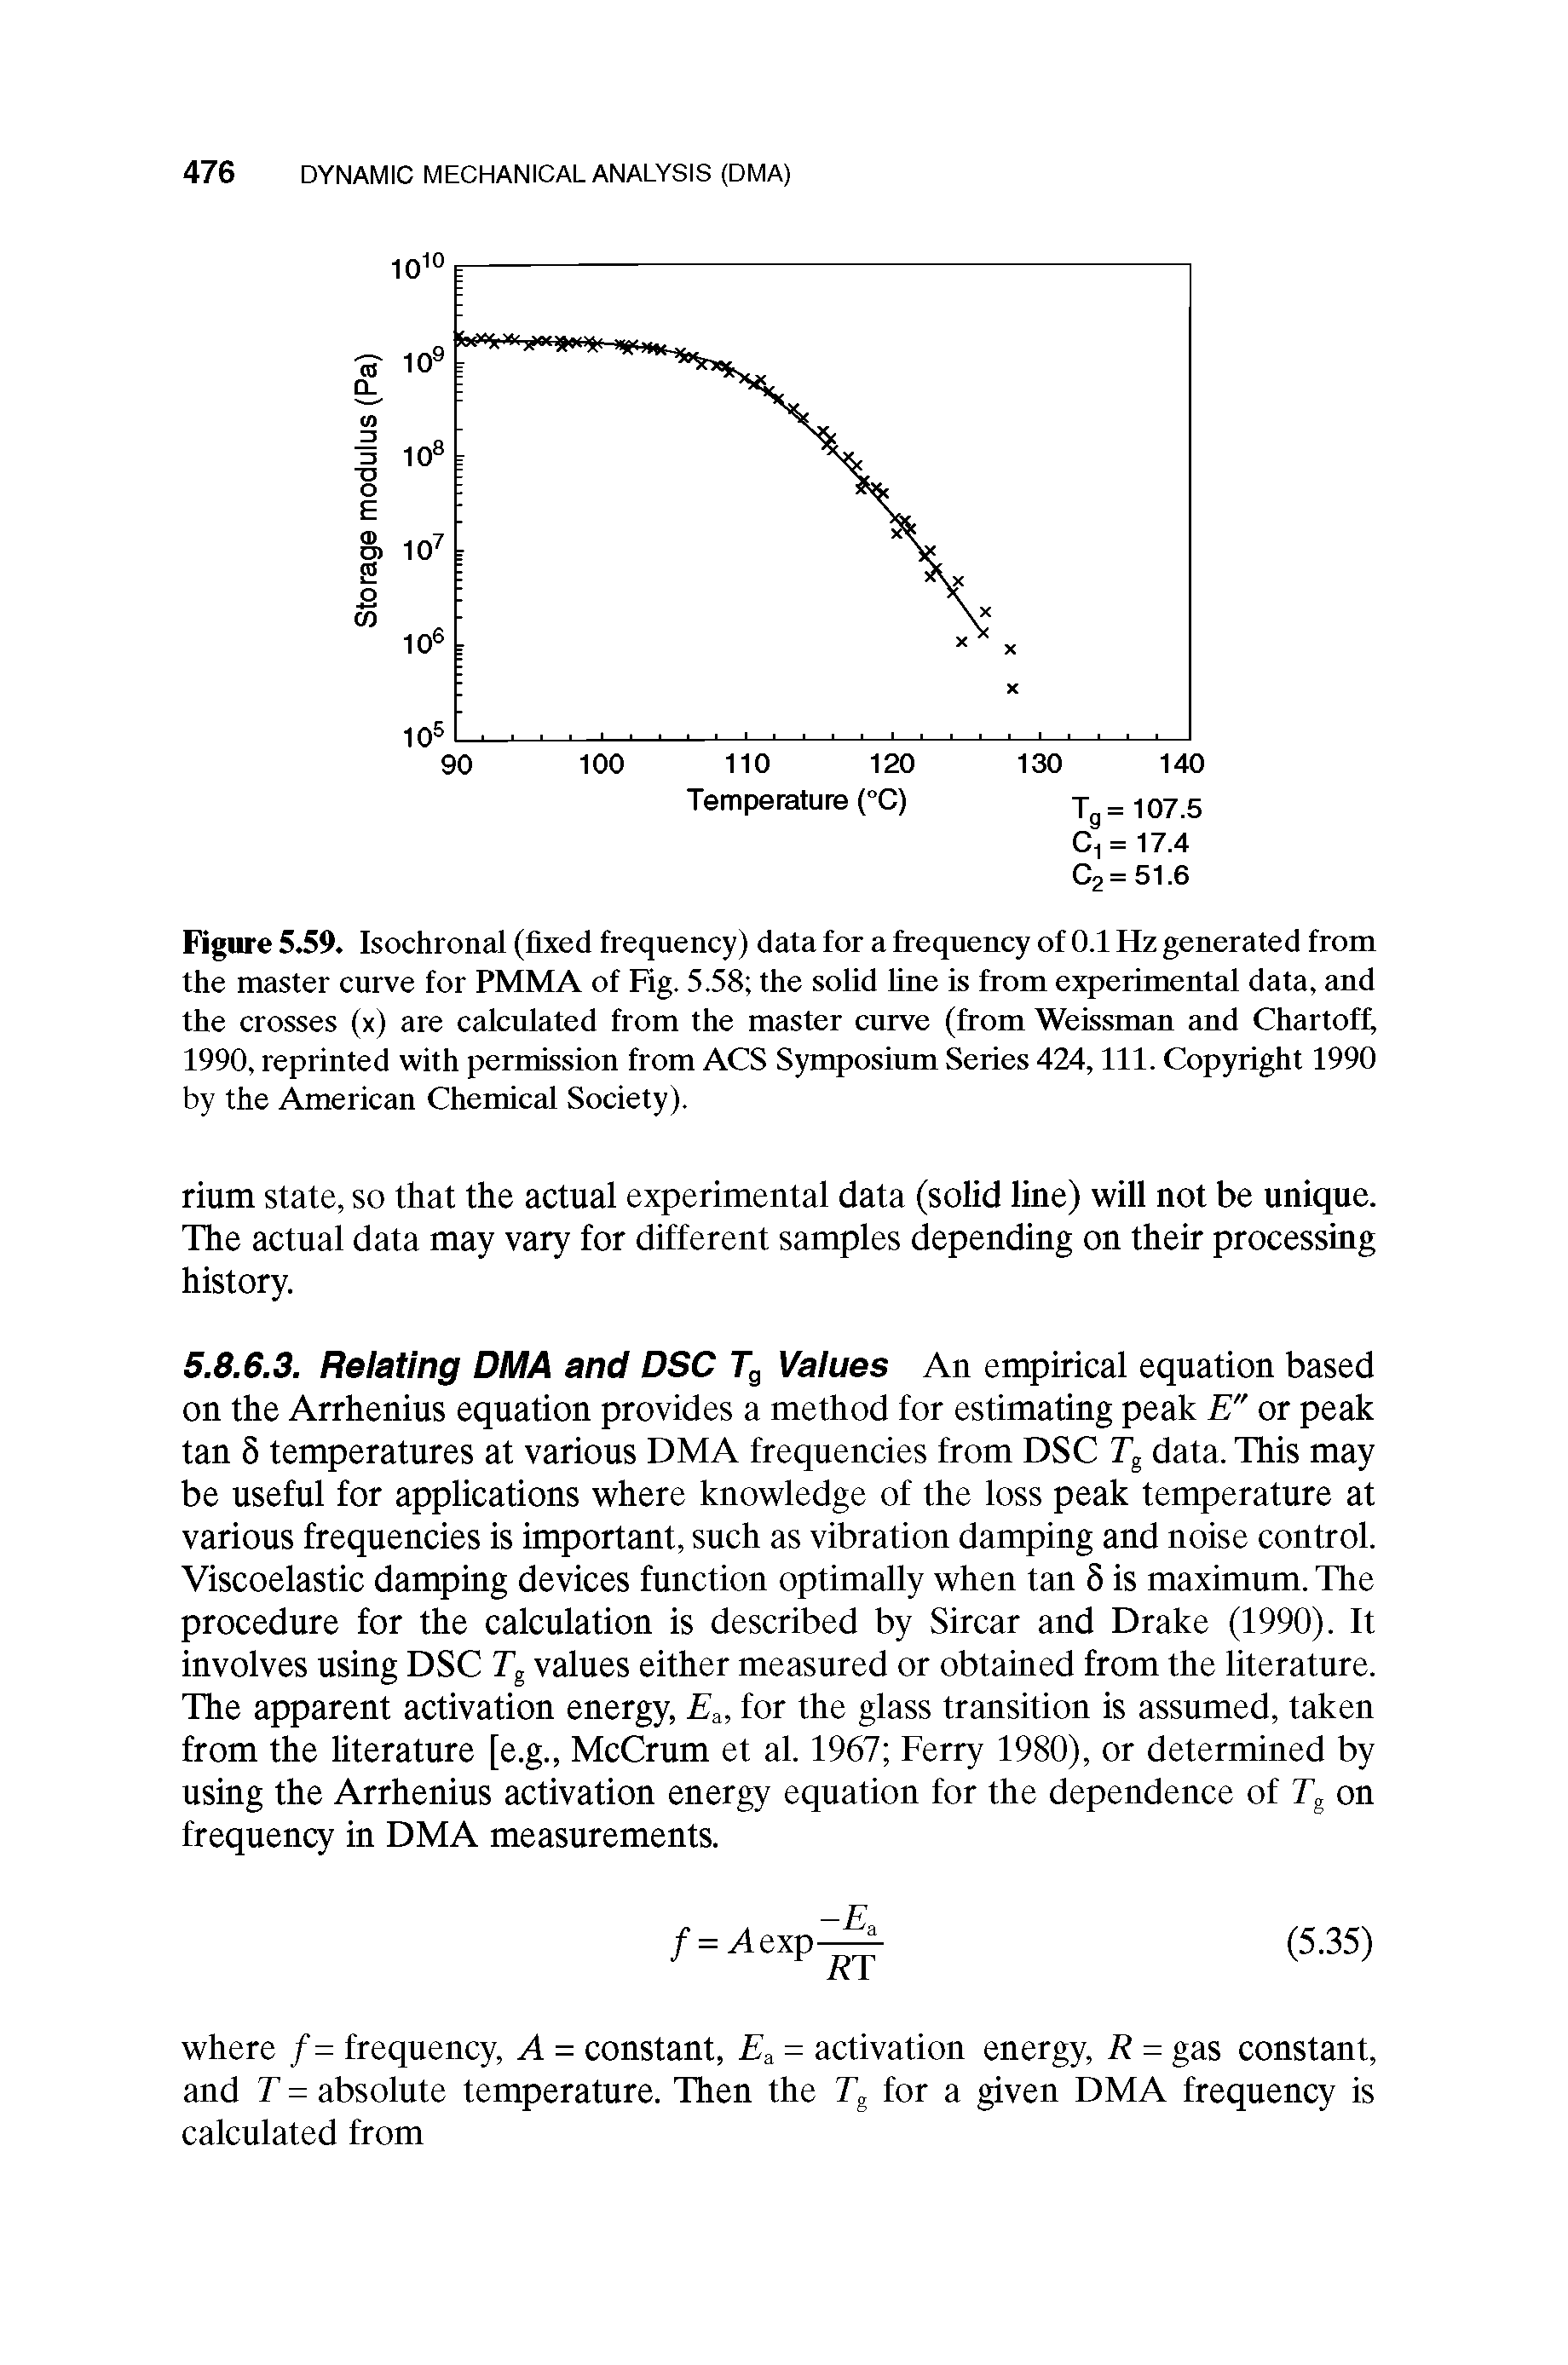 Figure 5.59. Isochronal (fixed frequency) data for a frequency of 0.1 Hz generated from the master curve for PMMA of Fig. 5.58 the soUd fine is from experimental data, and the crosses (x) are calculated from the master curve (from Weissman and Chartoff, 1990, reprinted with permission from ACS Symposium Series 424, 111. Copyright 1990 by the American Chemical Society).